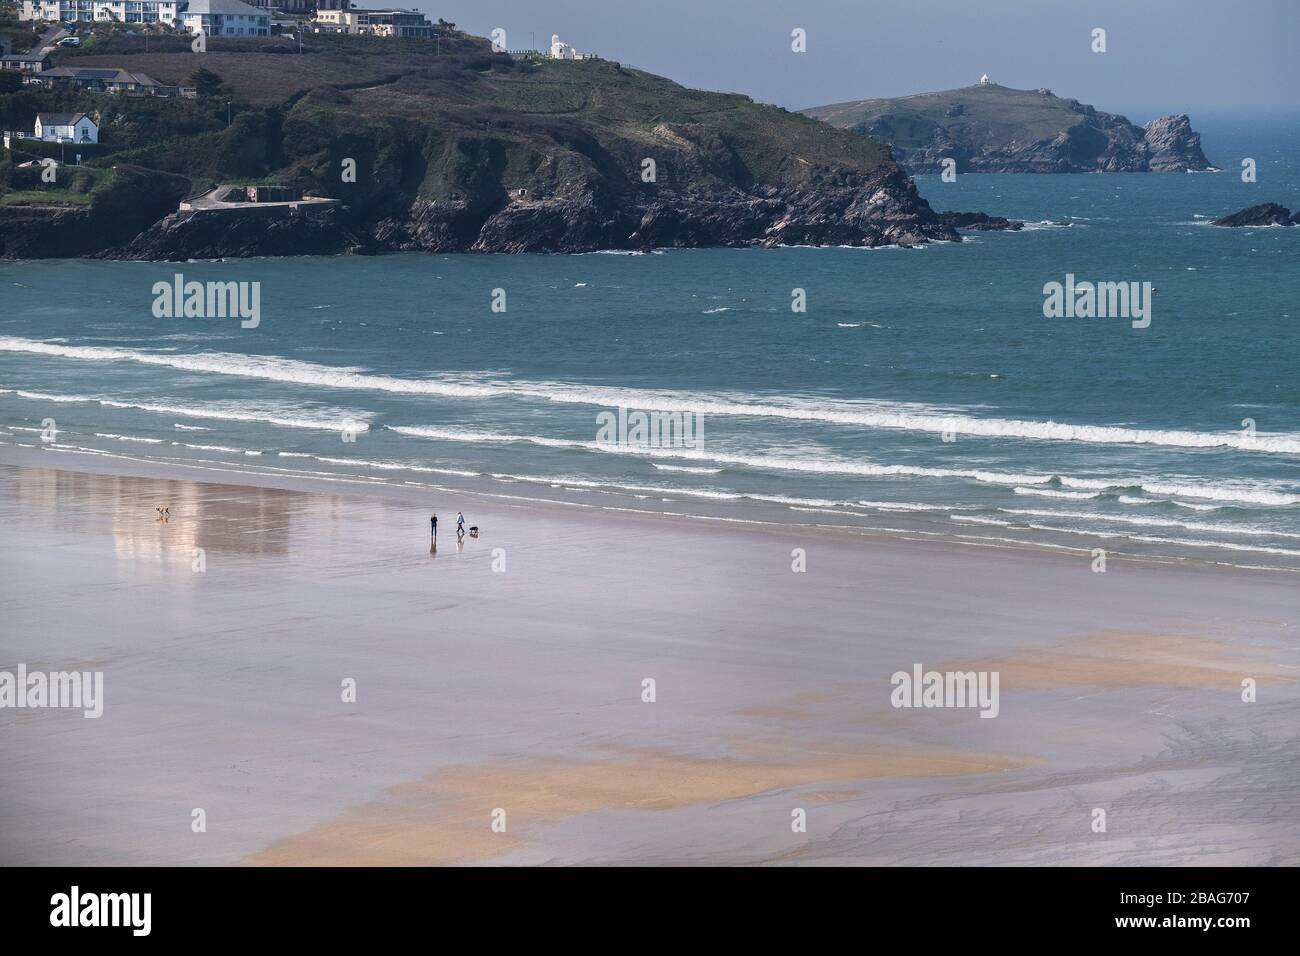 Newquay, Cornwall, UK. 27 March, 2020.  The normally crowded beaches in Newquay are practically deserted due to everyone staying in their homes due to the Covid-19 restrictions.  The economy of the normally busy resort is suffering but everyone is doing their best to adhere to the government’s strict instructions.   Gordon Scammell/Alamy Live News. Stock Photo